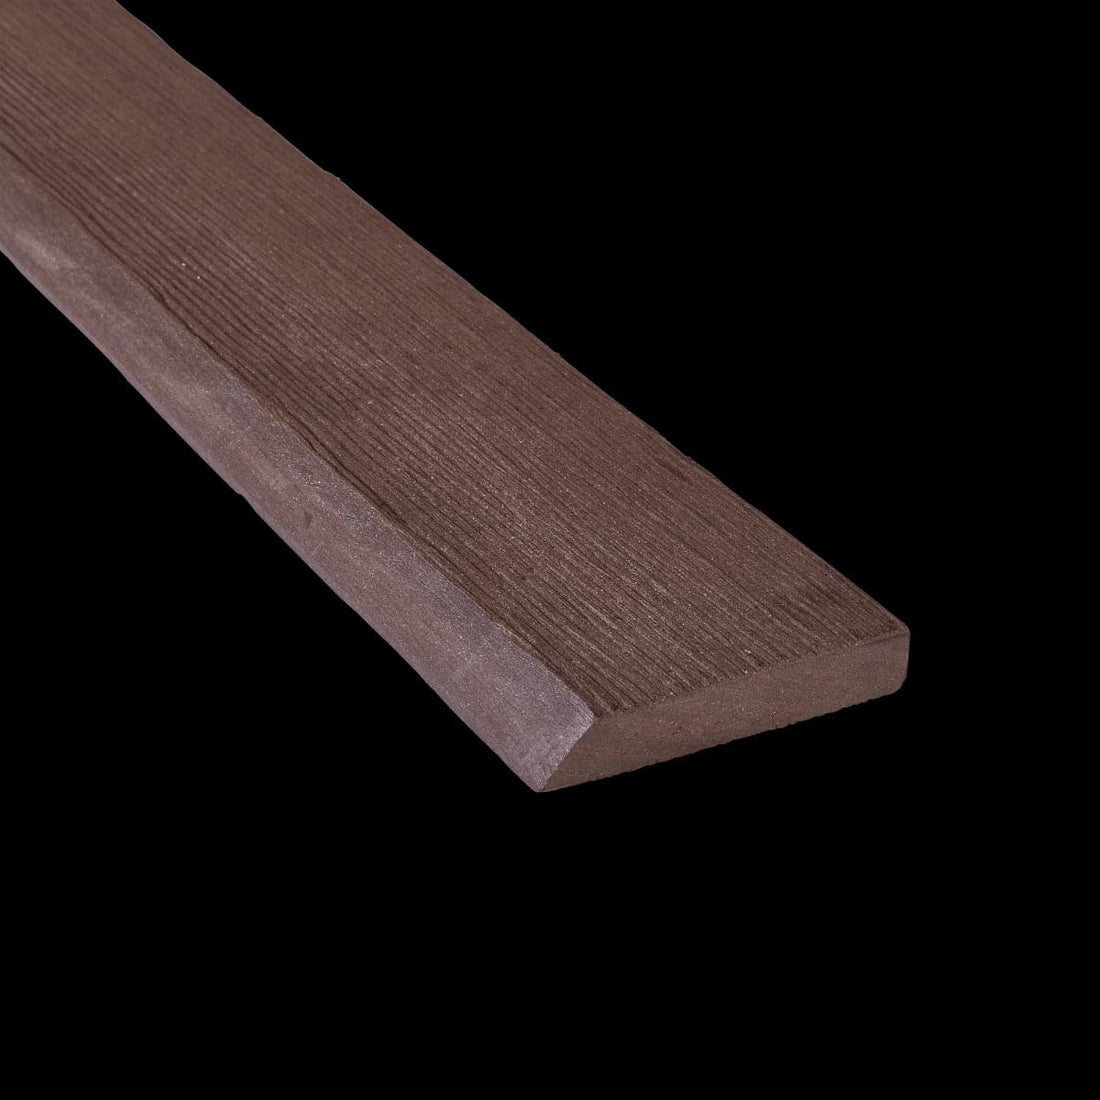 BROWN END STRIP FOR KYOTO NATERIAL COMPOSITE PLANK 240X5.5 THICKNESS 1.5 - best price from Maltashopper.com BR500012720